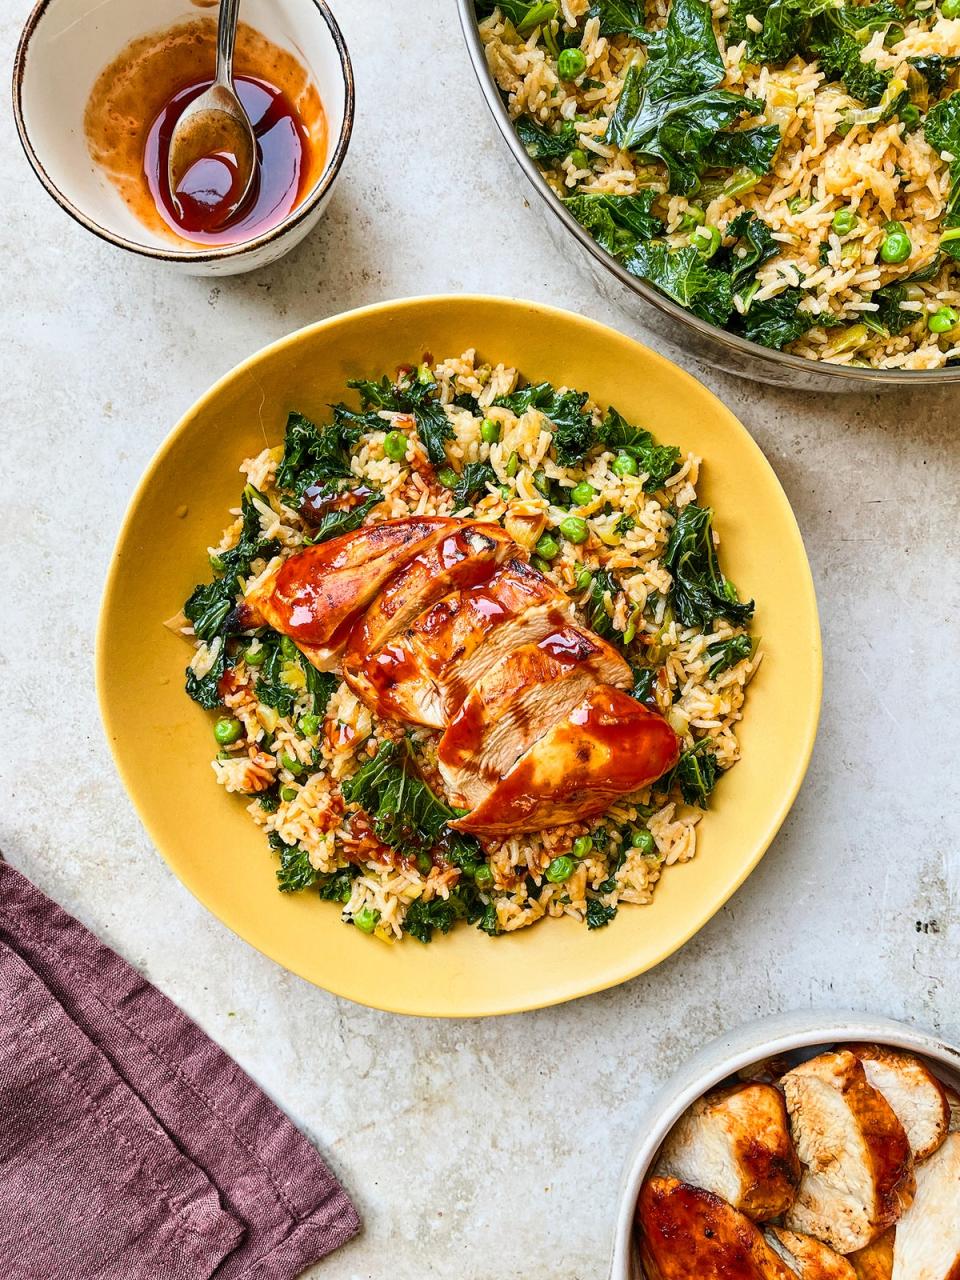 The sticky chicken, kale and rice makes a delicious yet nutritious takeaway alternative (Discover Great Veg)